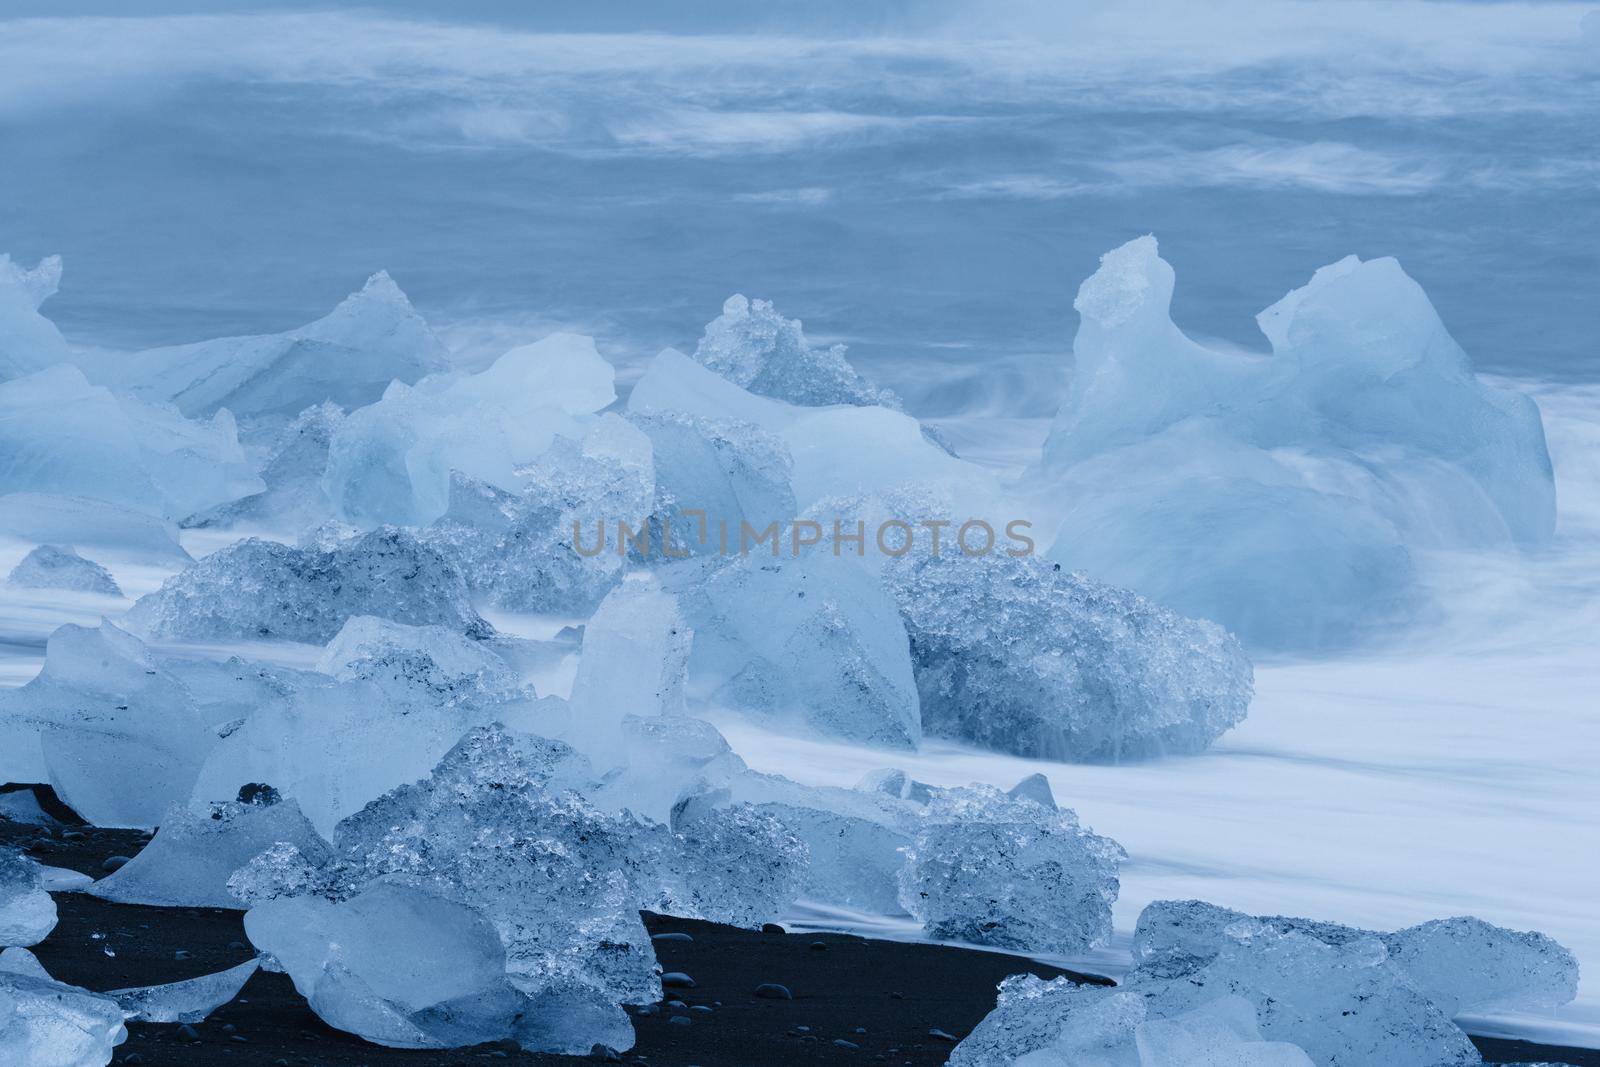 Spectacular icebergs over the black sand beach beaten by the breaking waves, long exposure